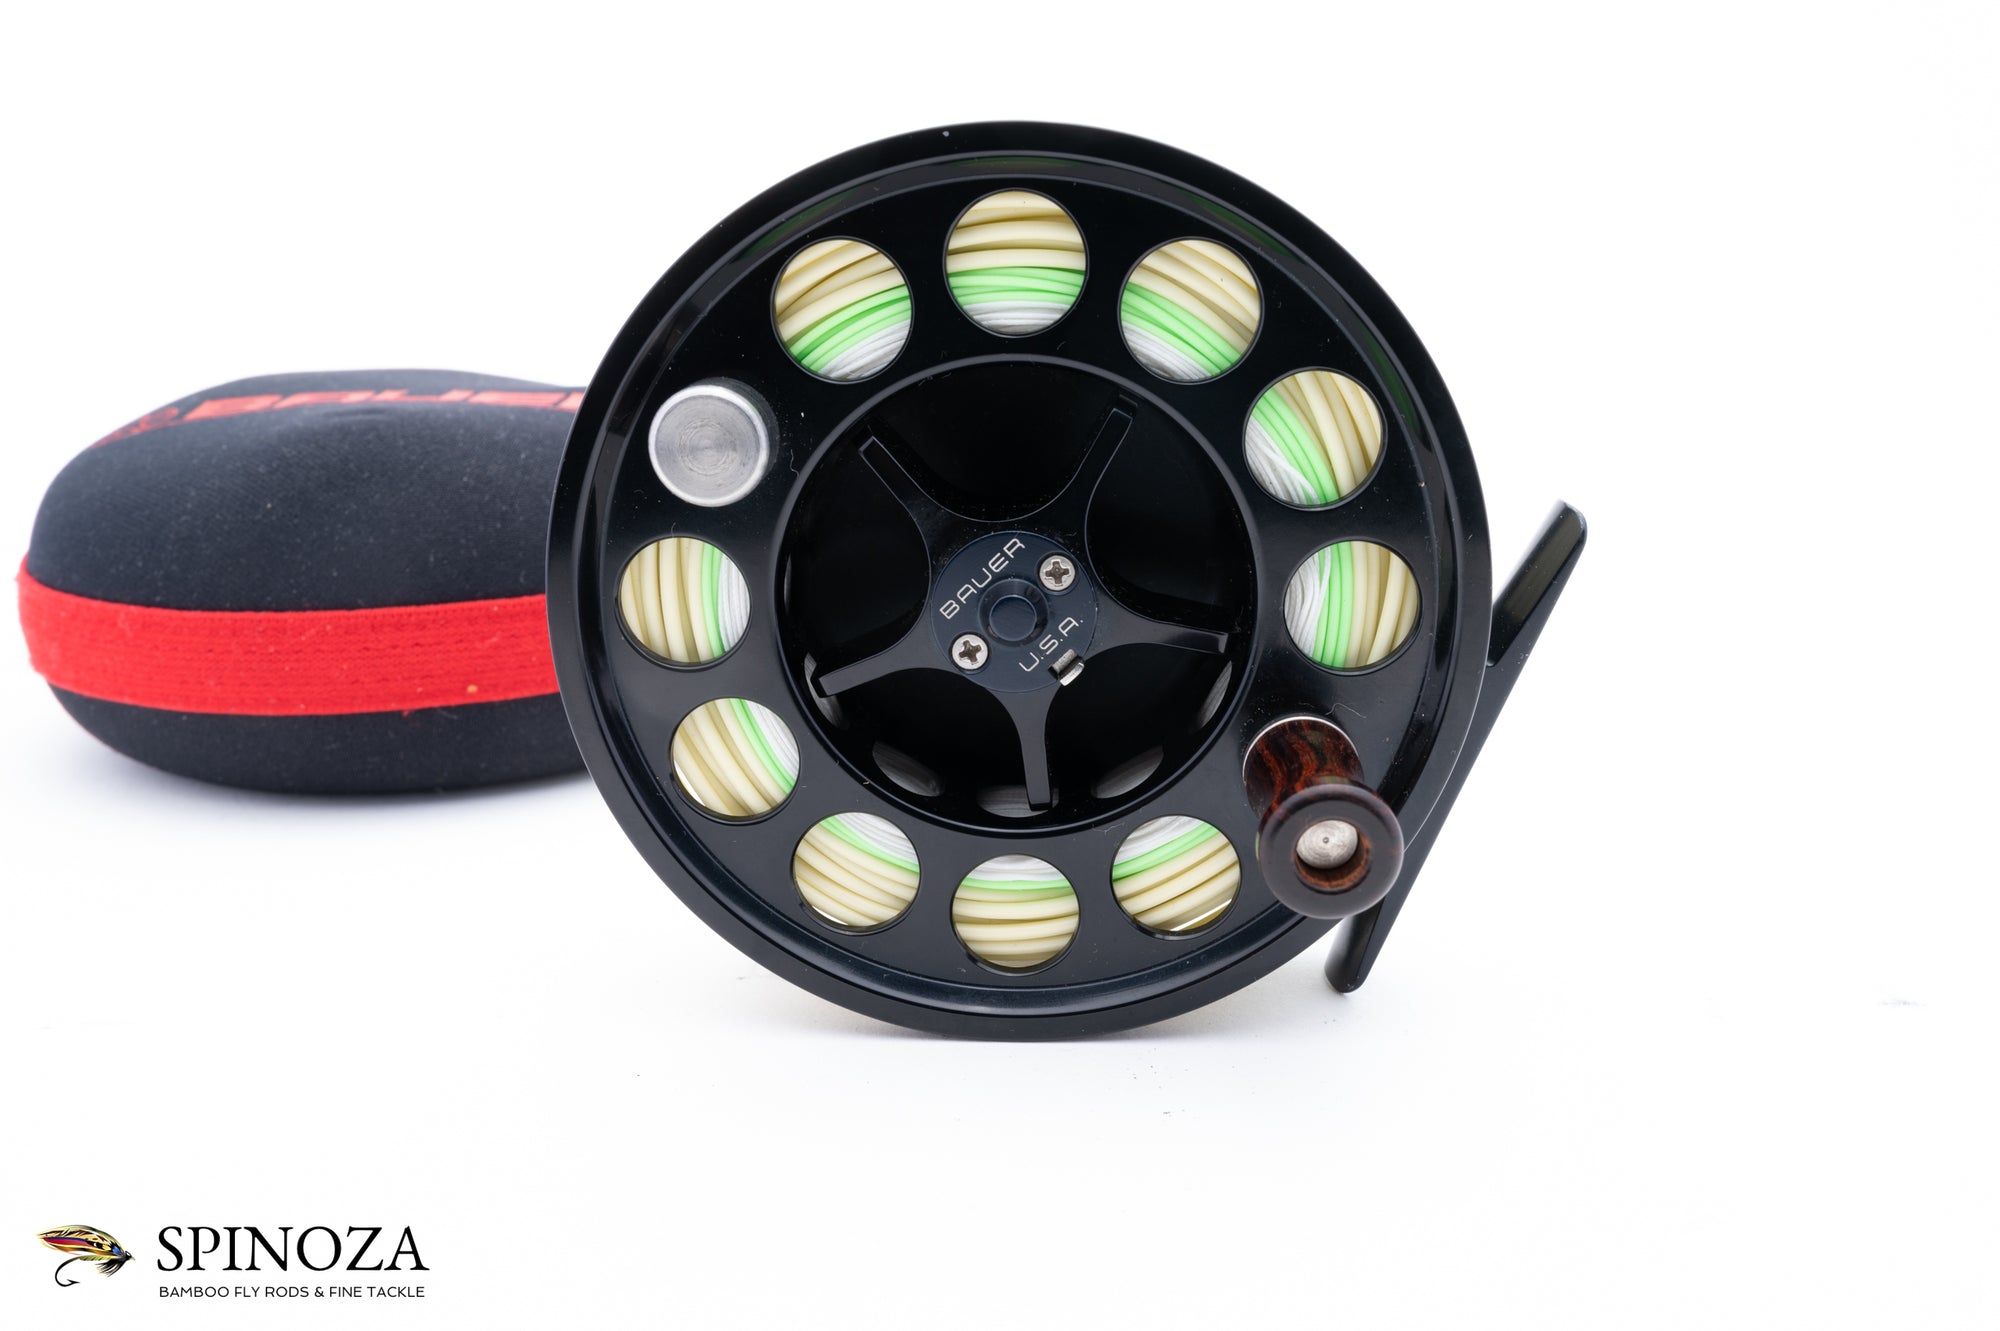 Bauer M4 Fly Reel